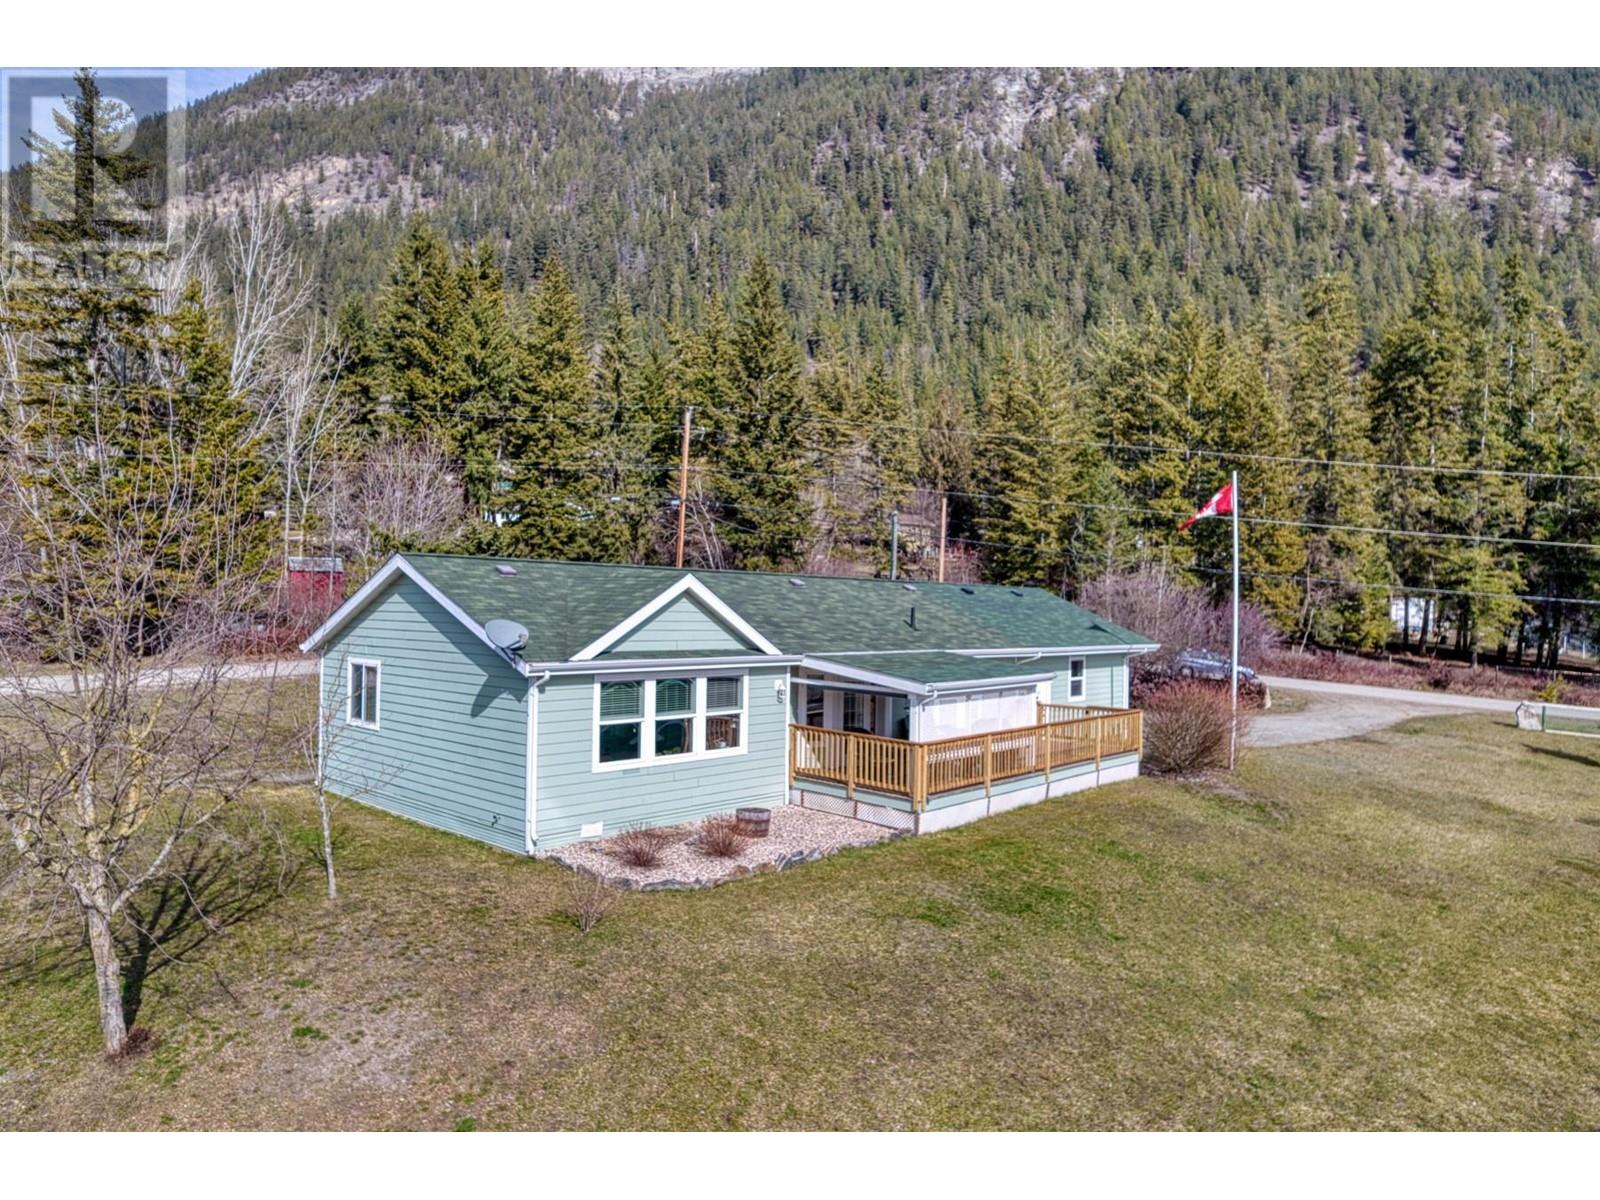 737 Mobley Road, tappen, British Columbia